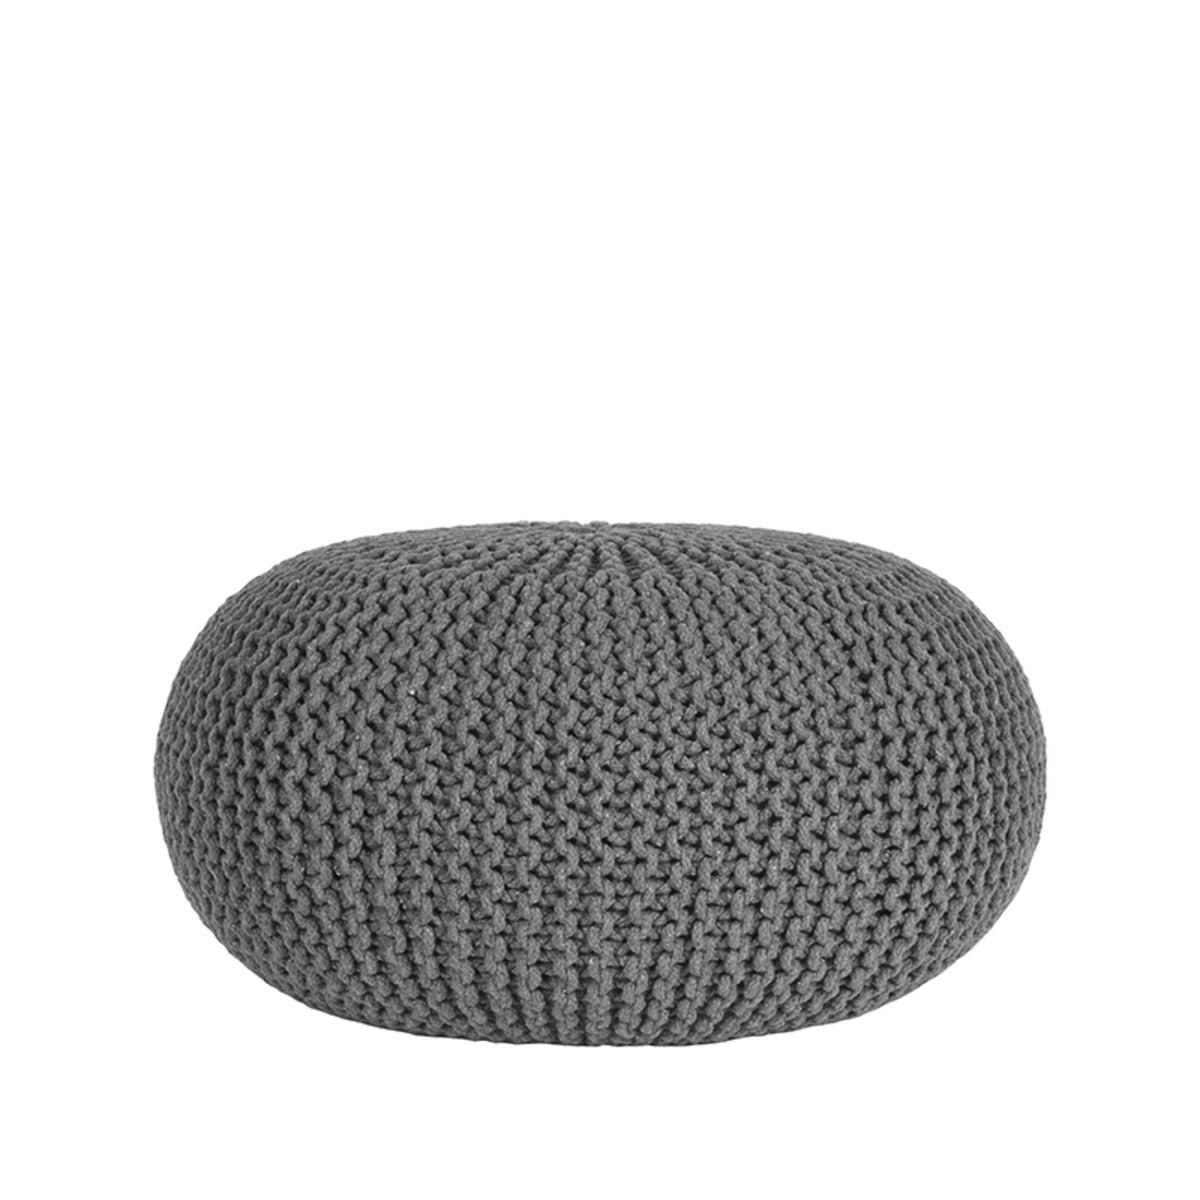 LABEL51 Pouf Knitted - Dark Gray - Cotton - L